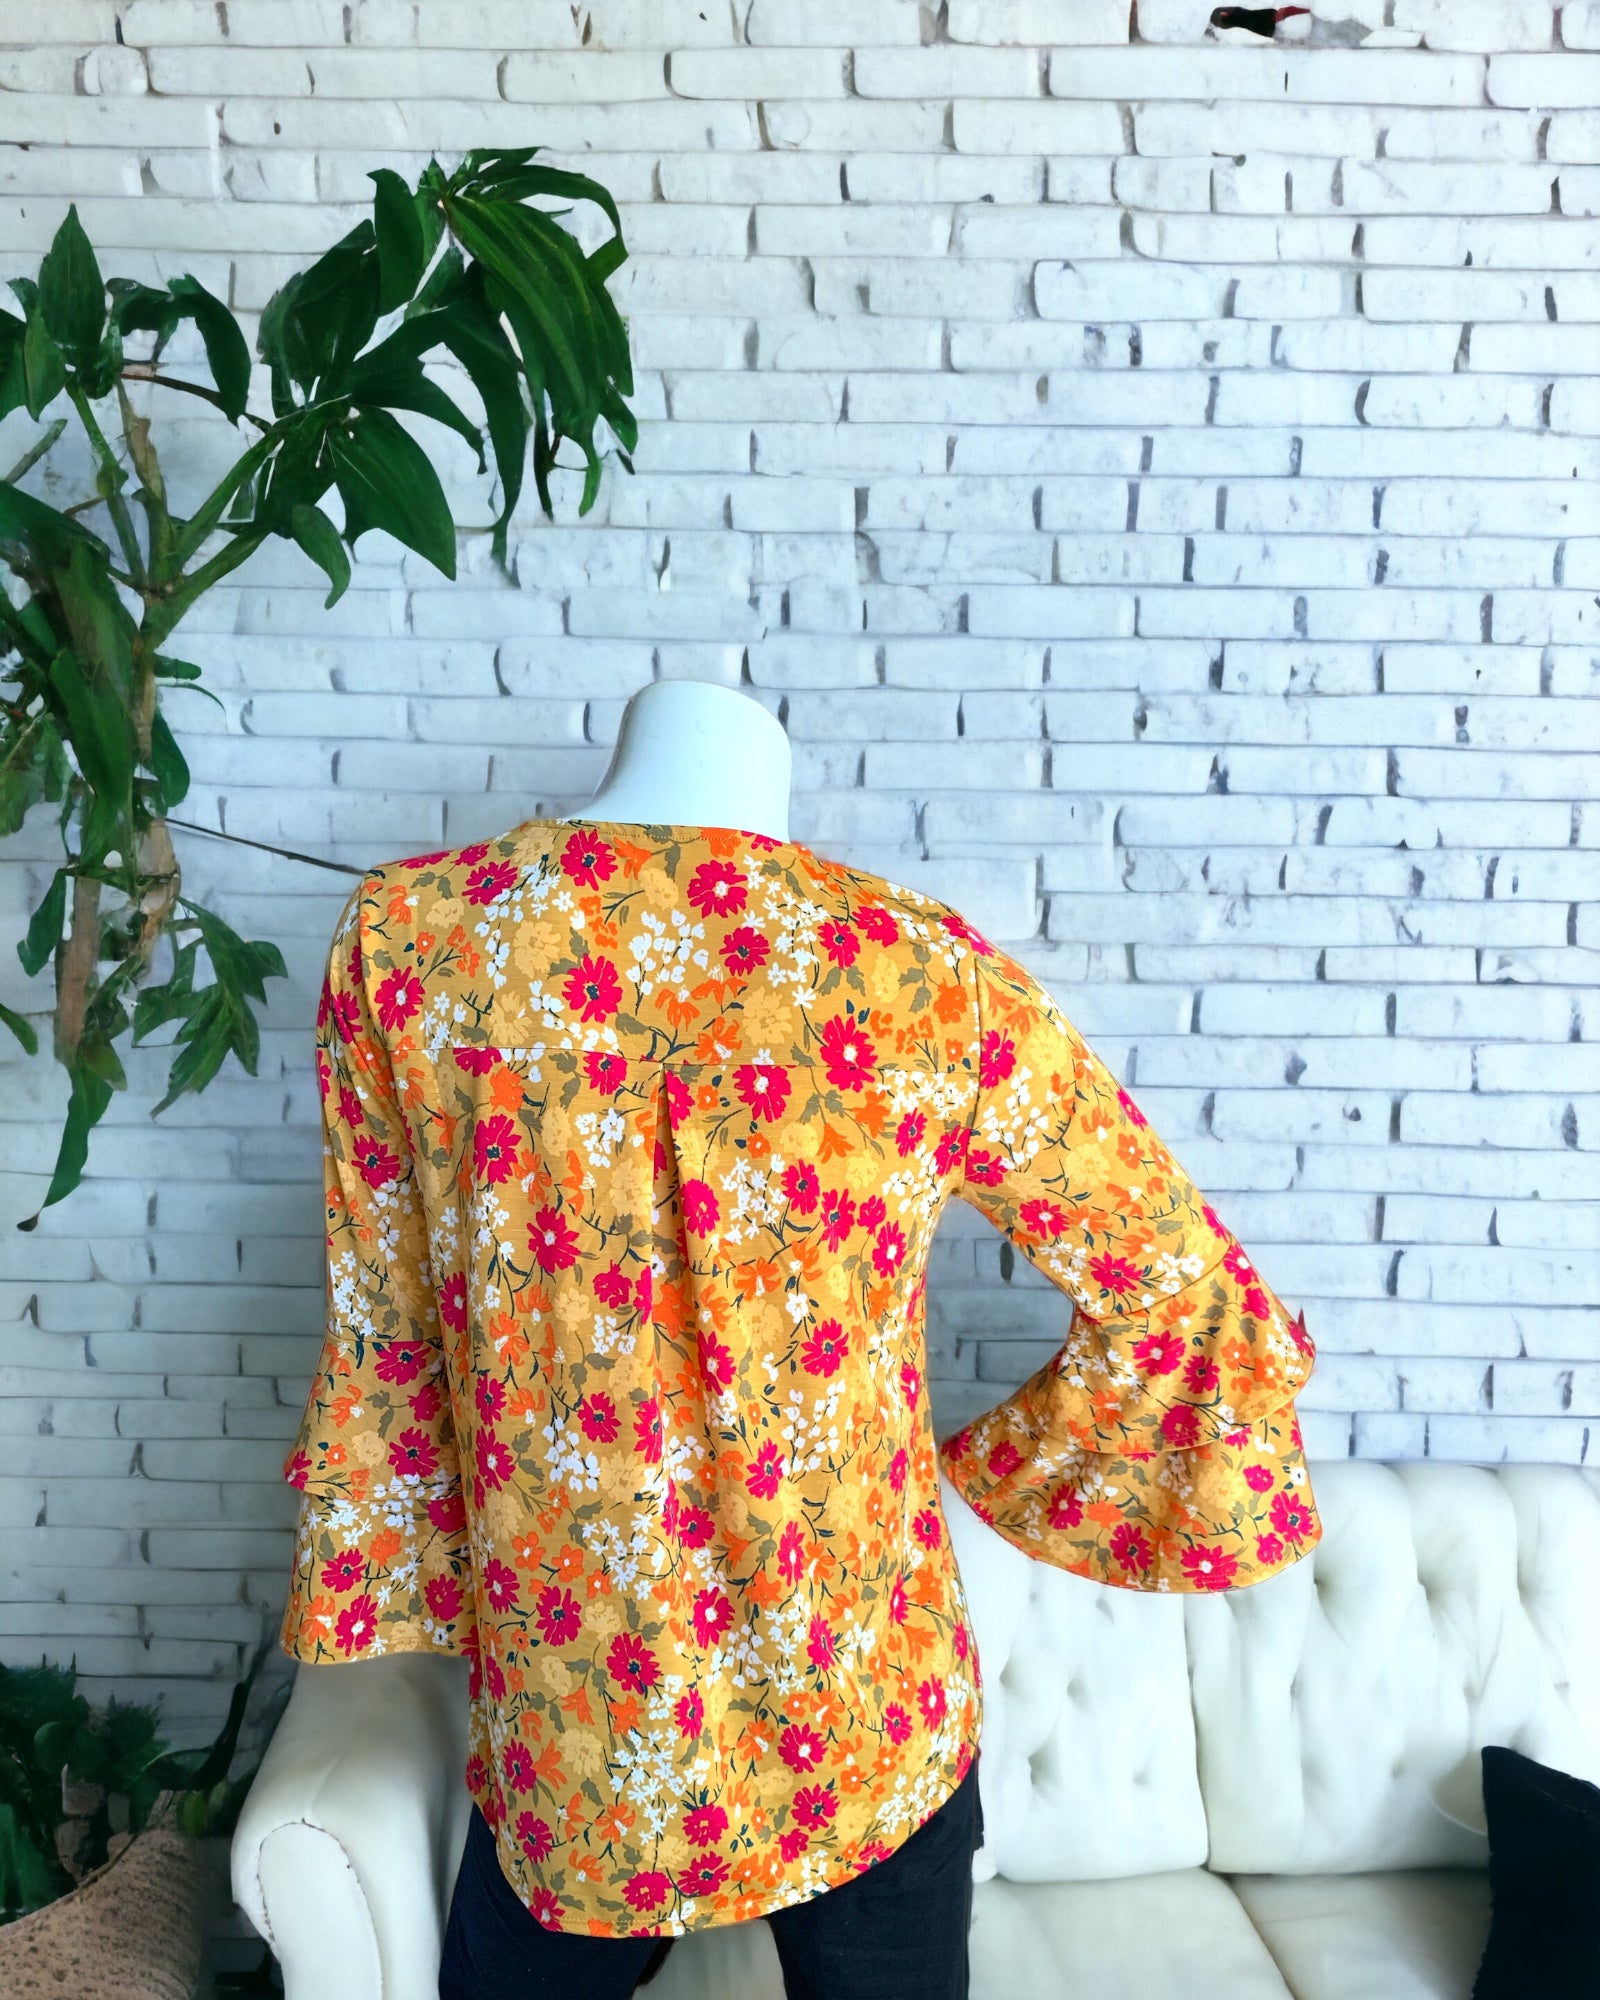 Tiered Ruffle Long Sleeve Marigold Floral Top worn with black leggings. Back view.